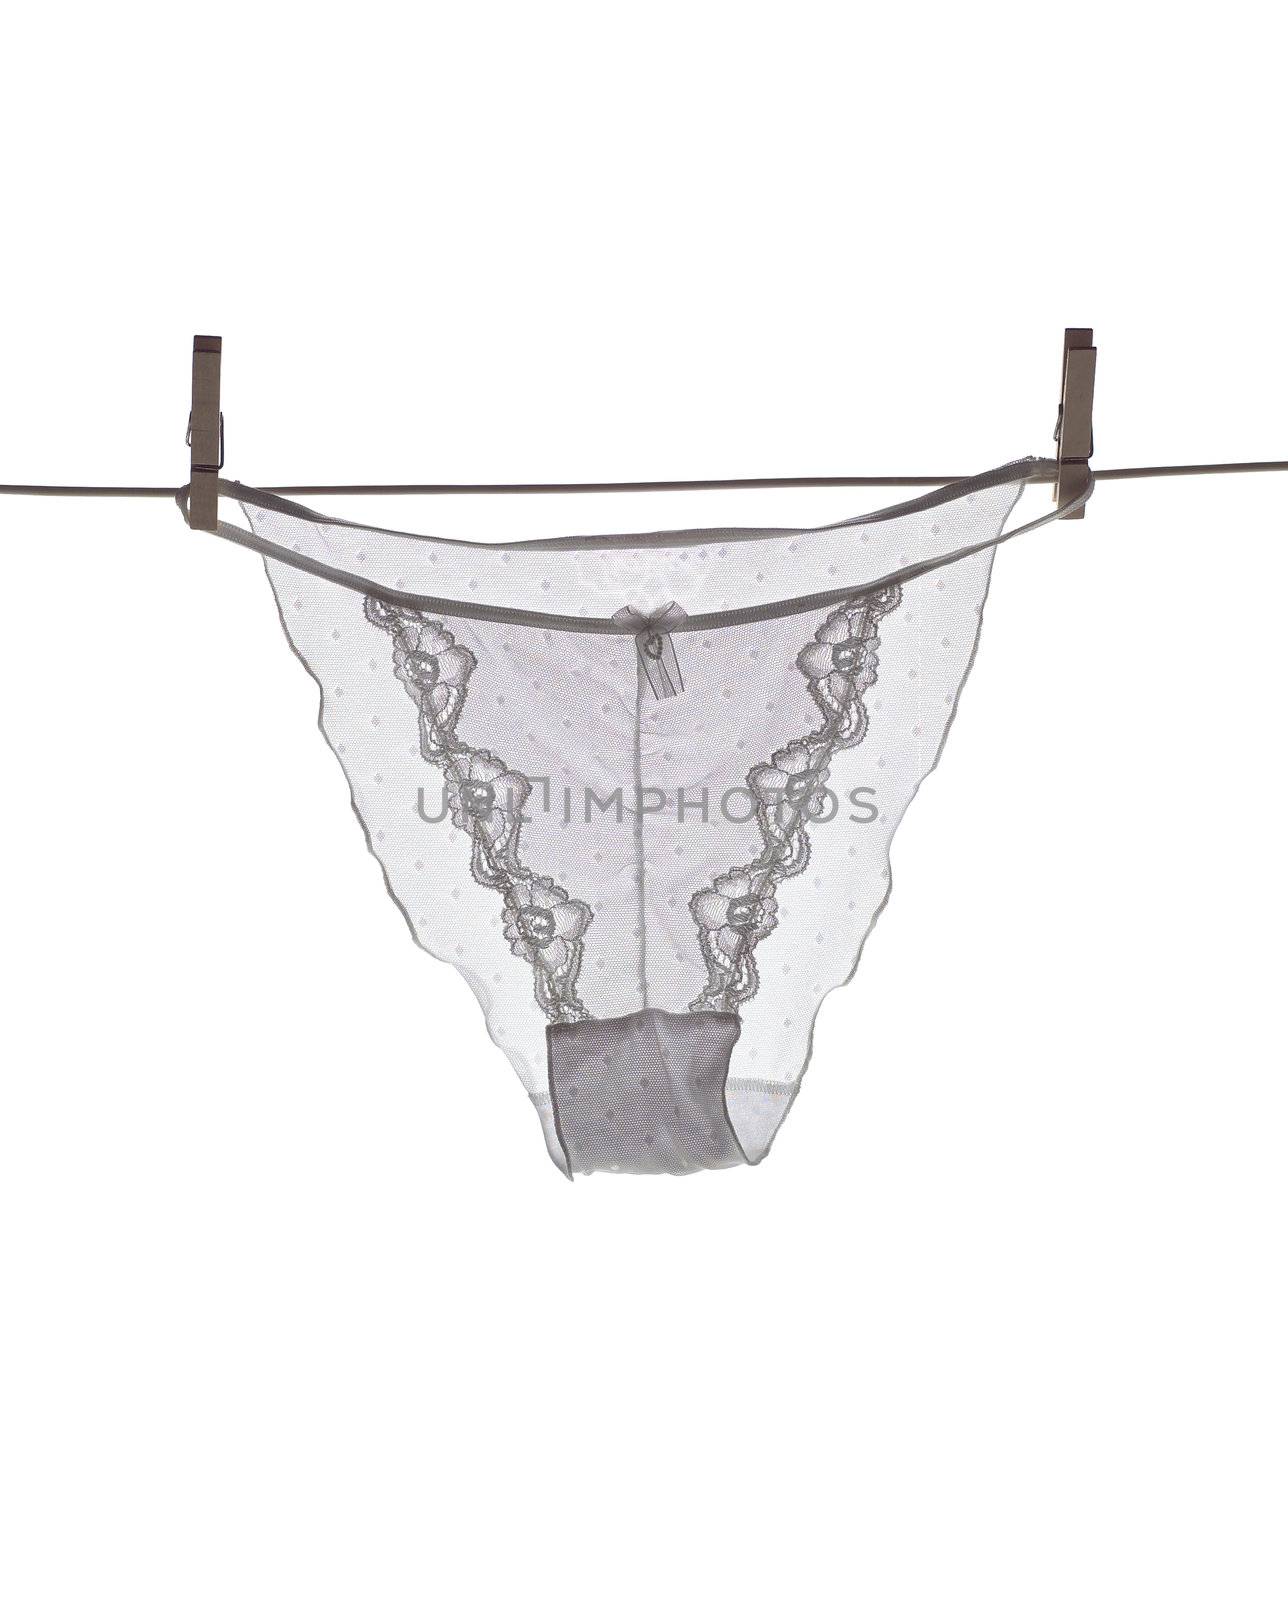 Underwear on a Clothesline isolated